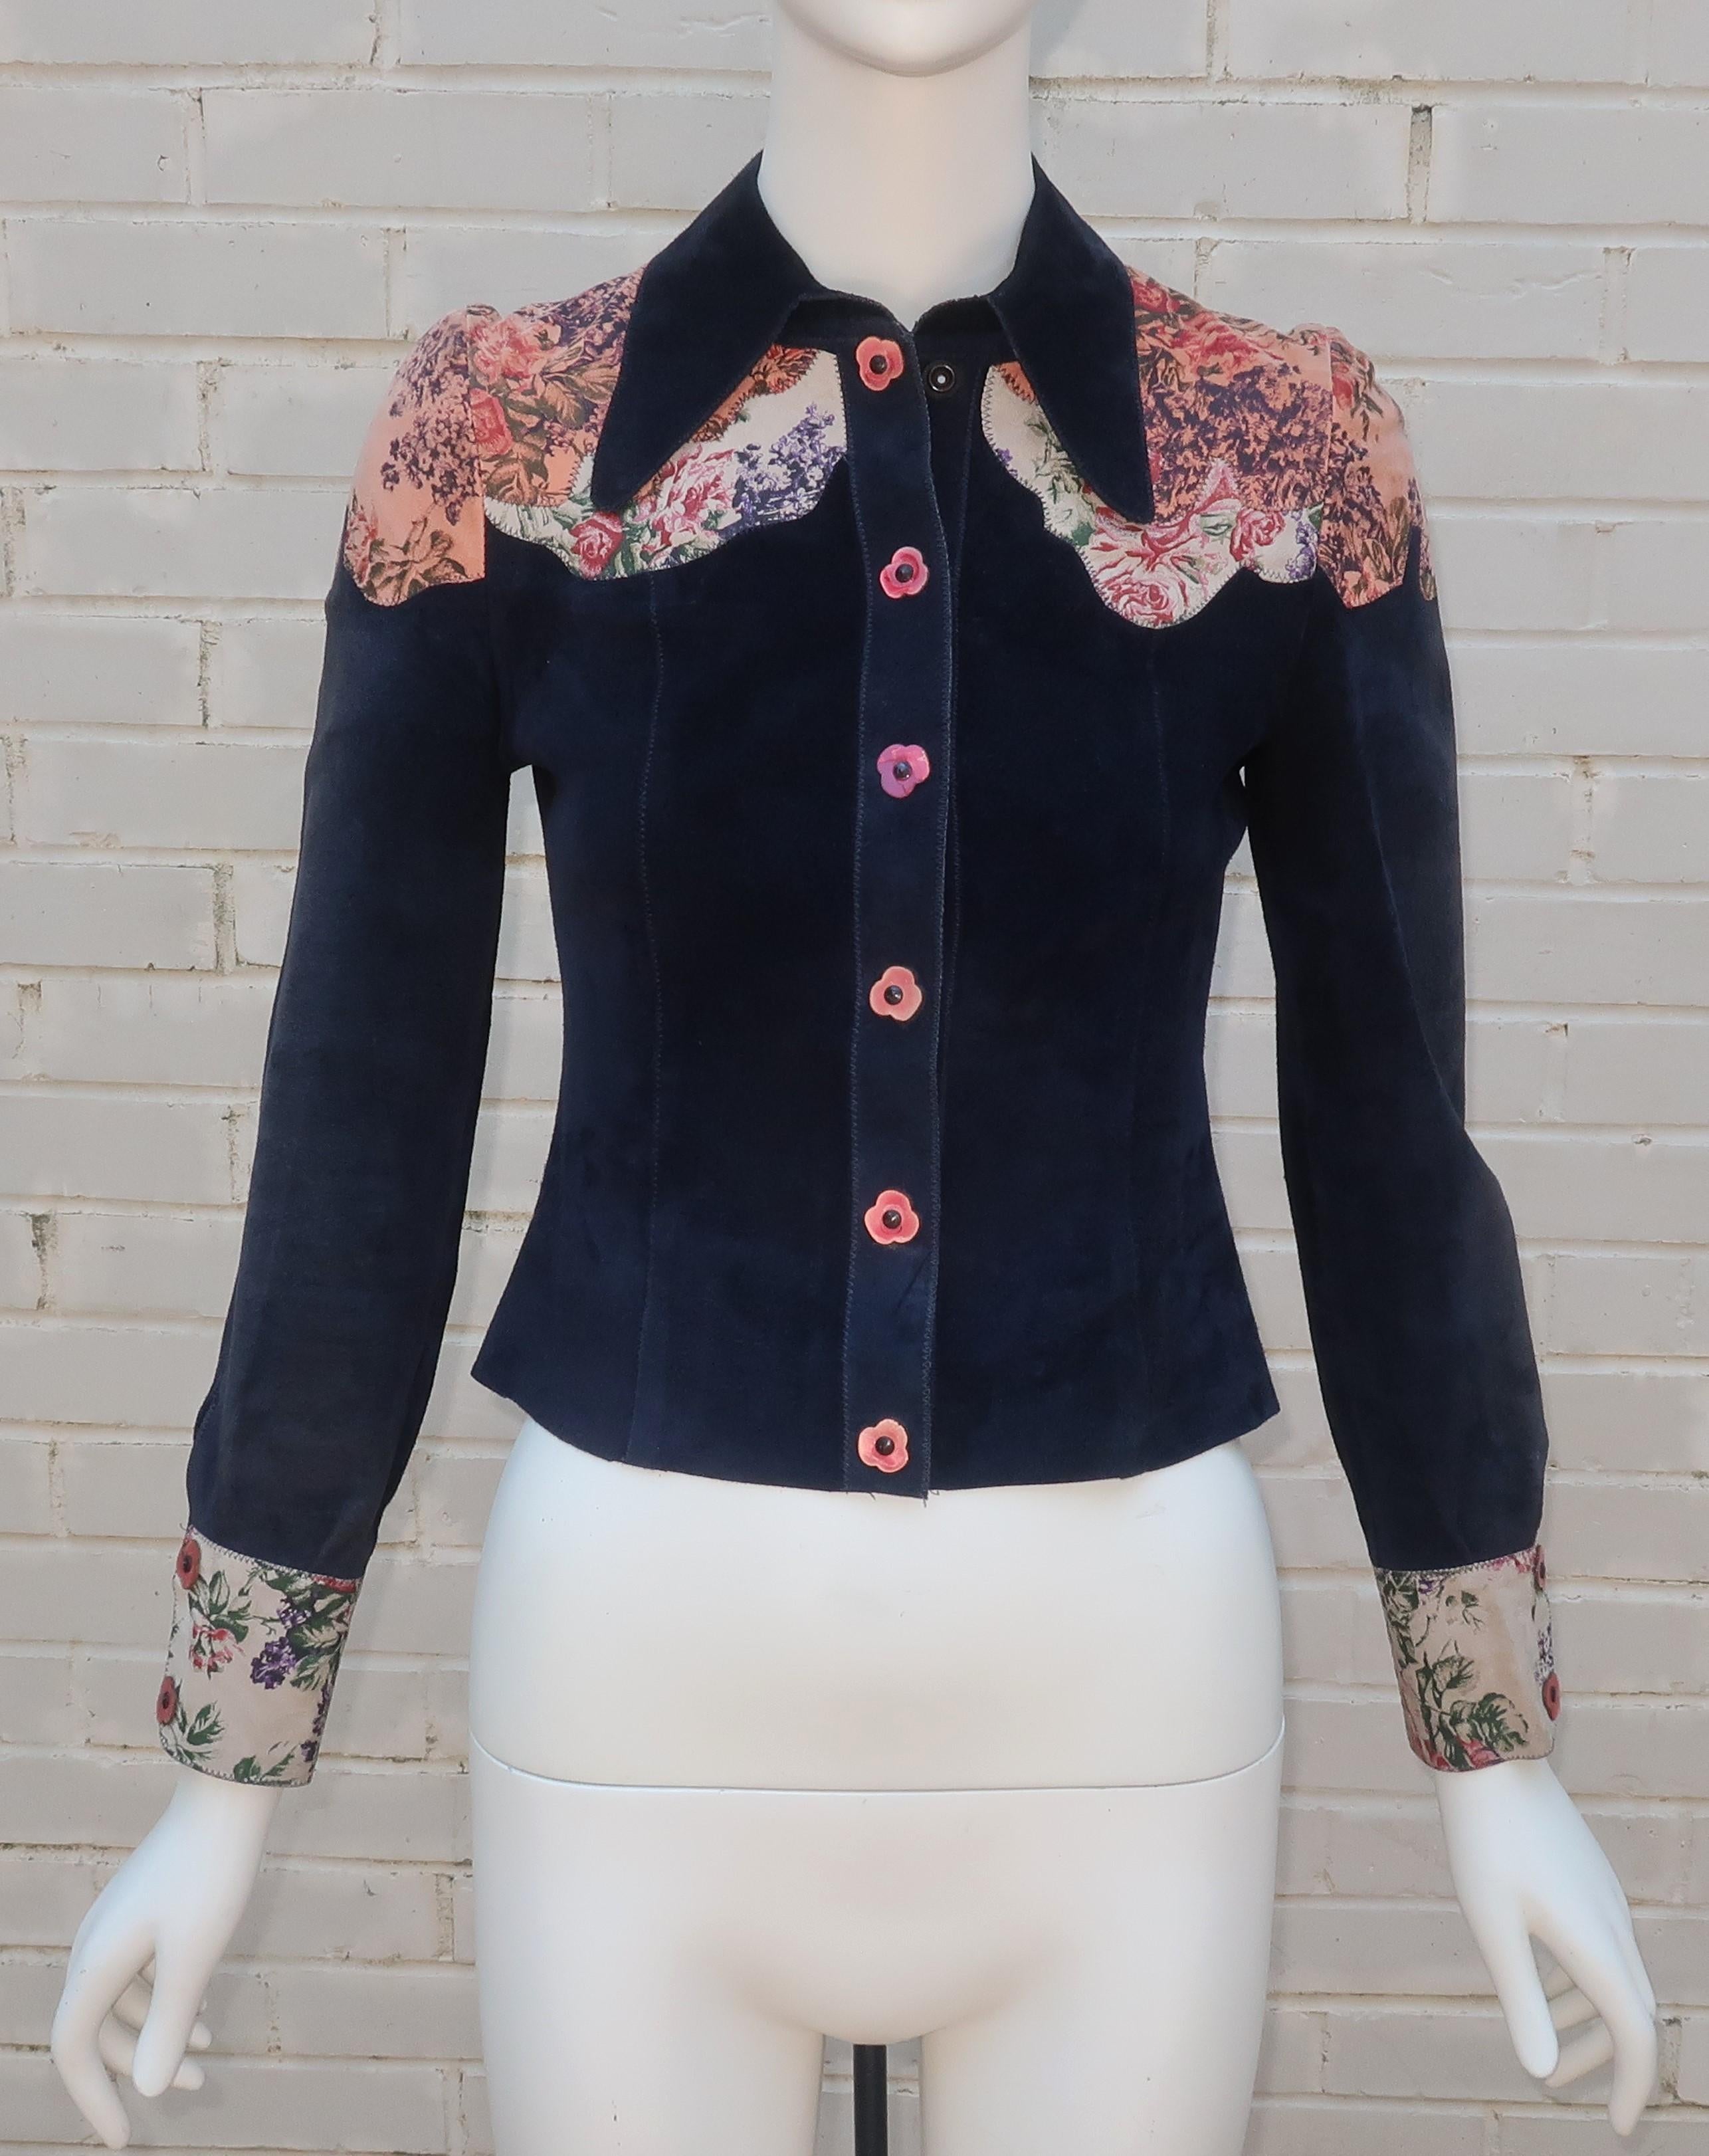 Roberto Cavalli Blue Suede Patchwork Printed Leather Jacket & Skirt, 1970's For Sale 3